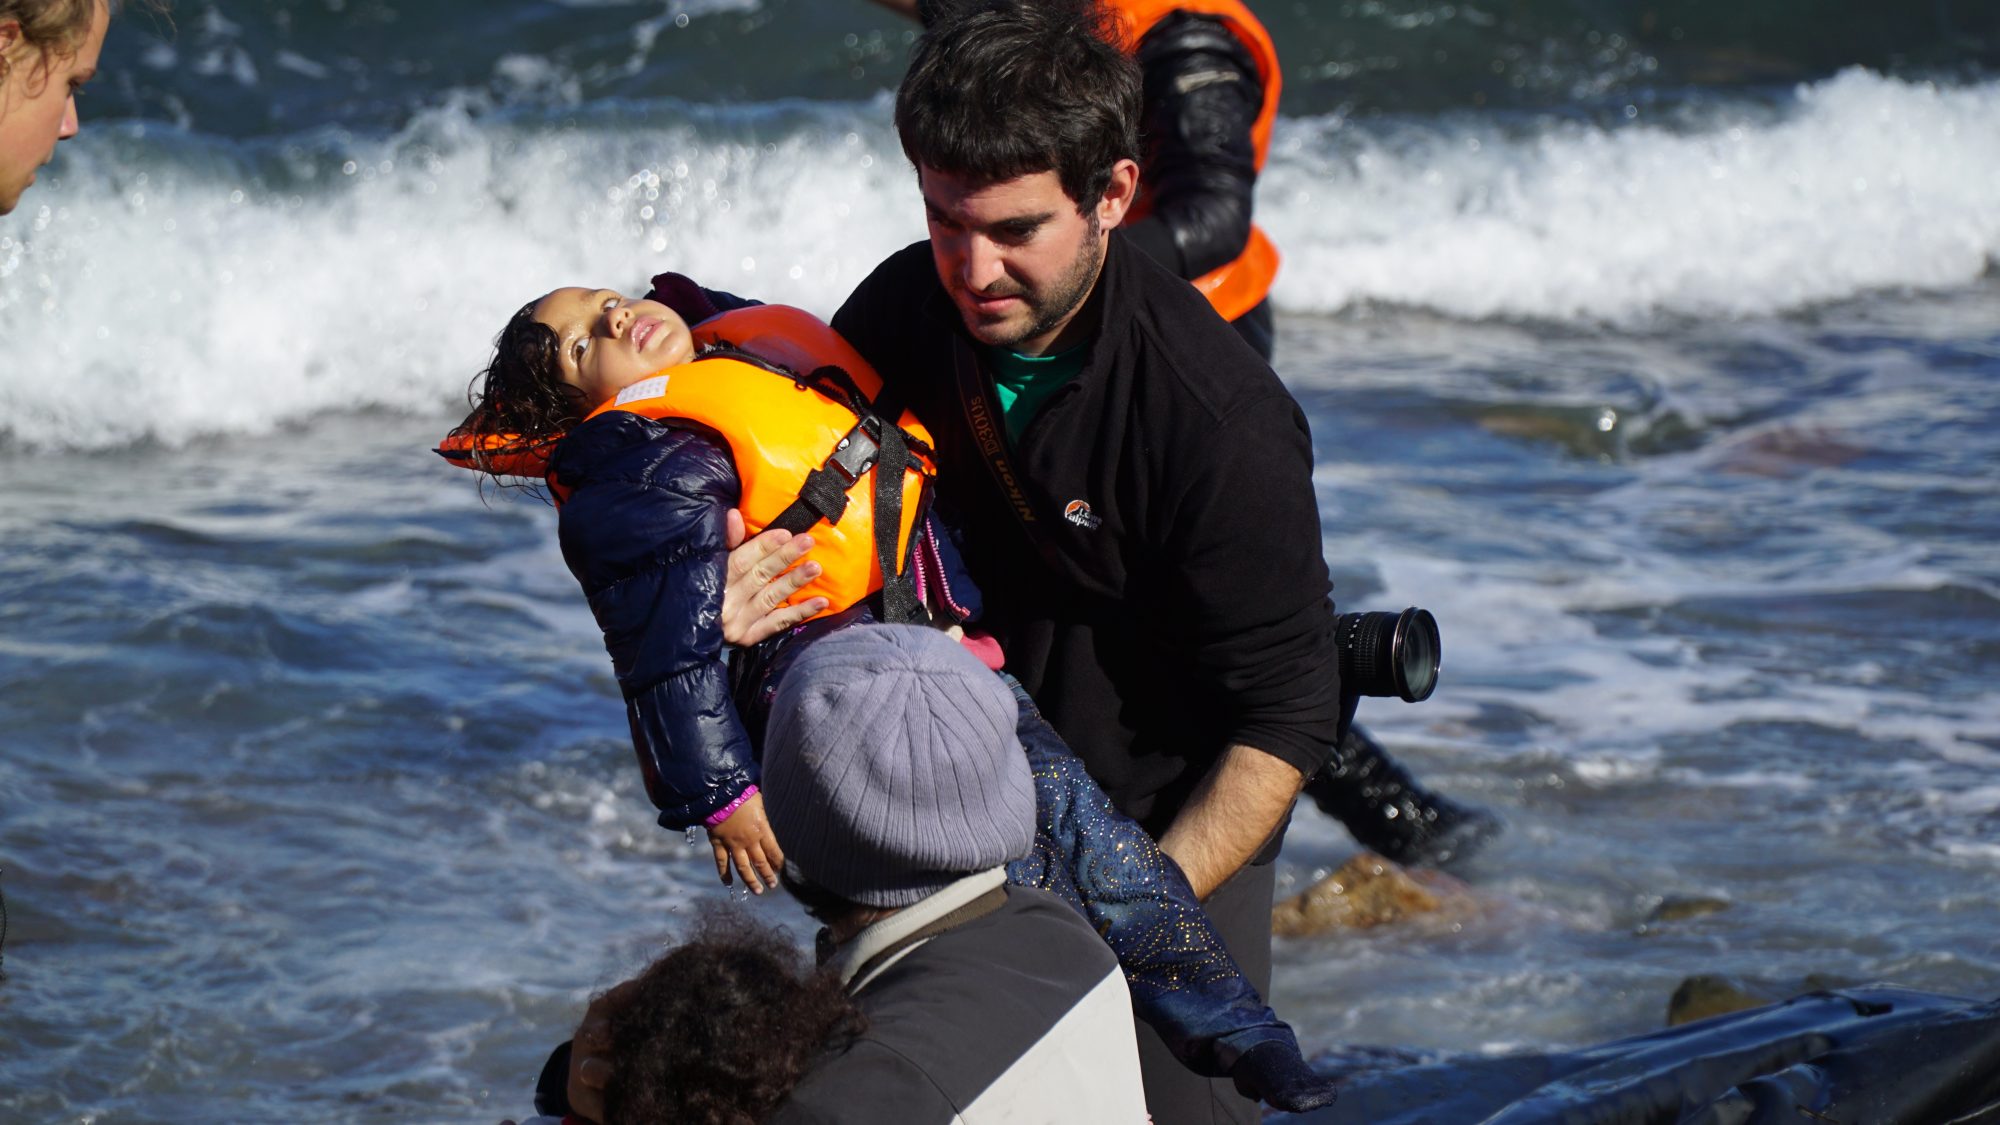 Young boy being pulled from boat after making journey across sea in refugee migrant boat